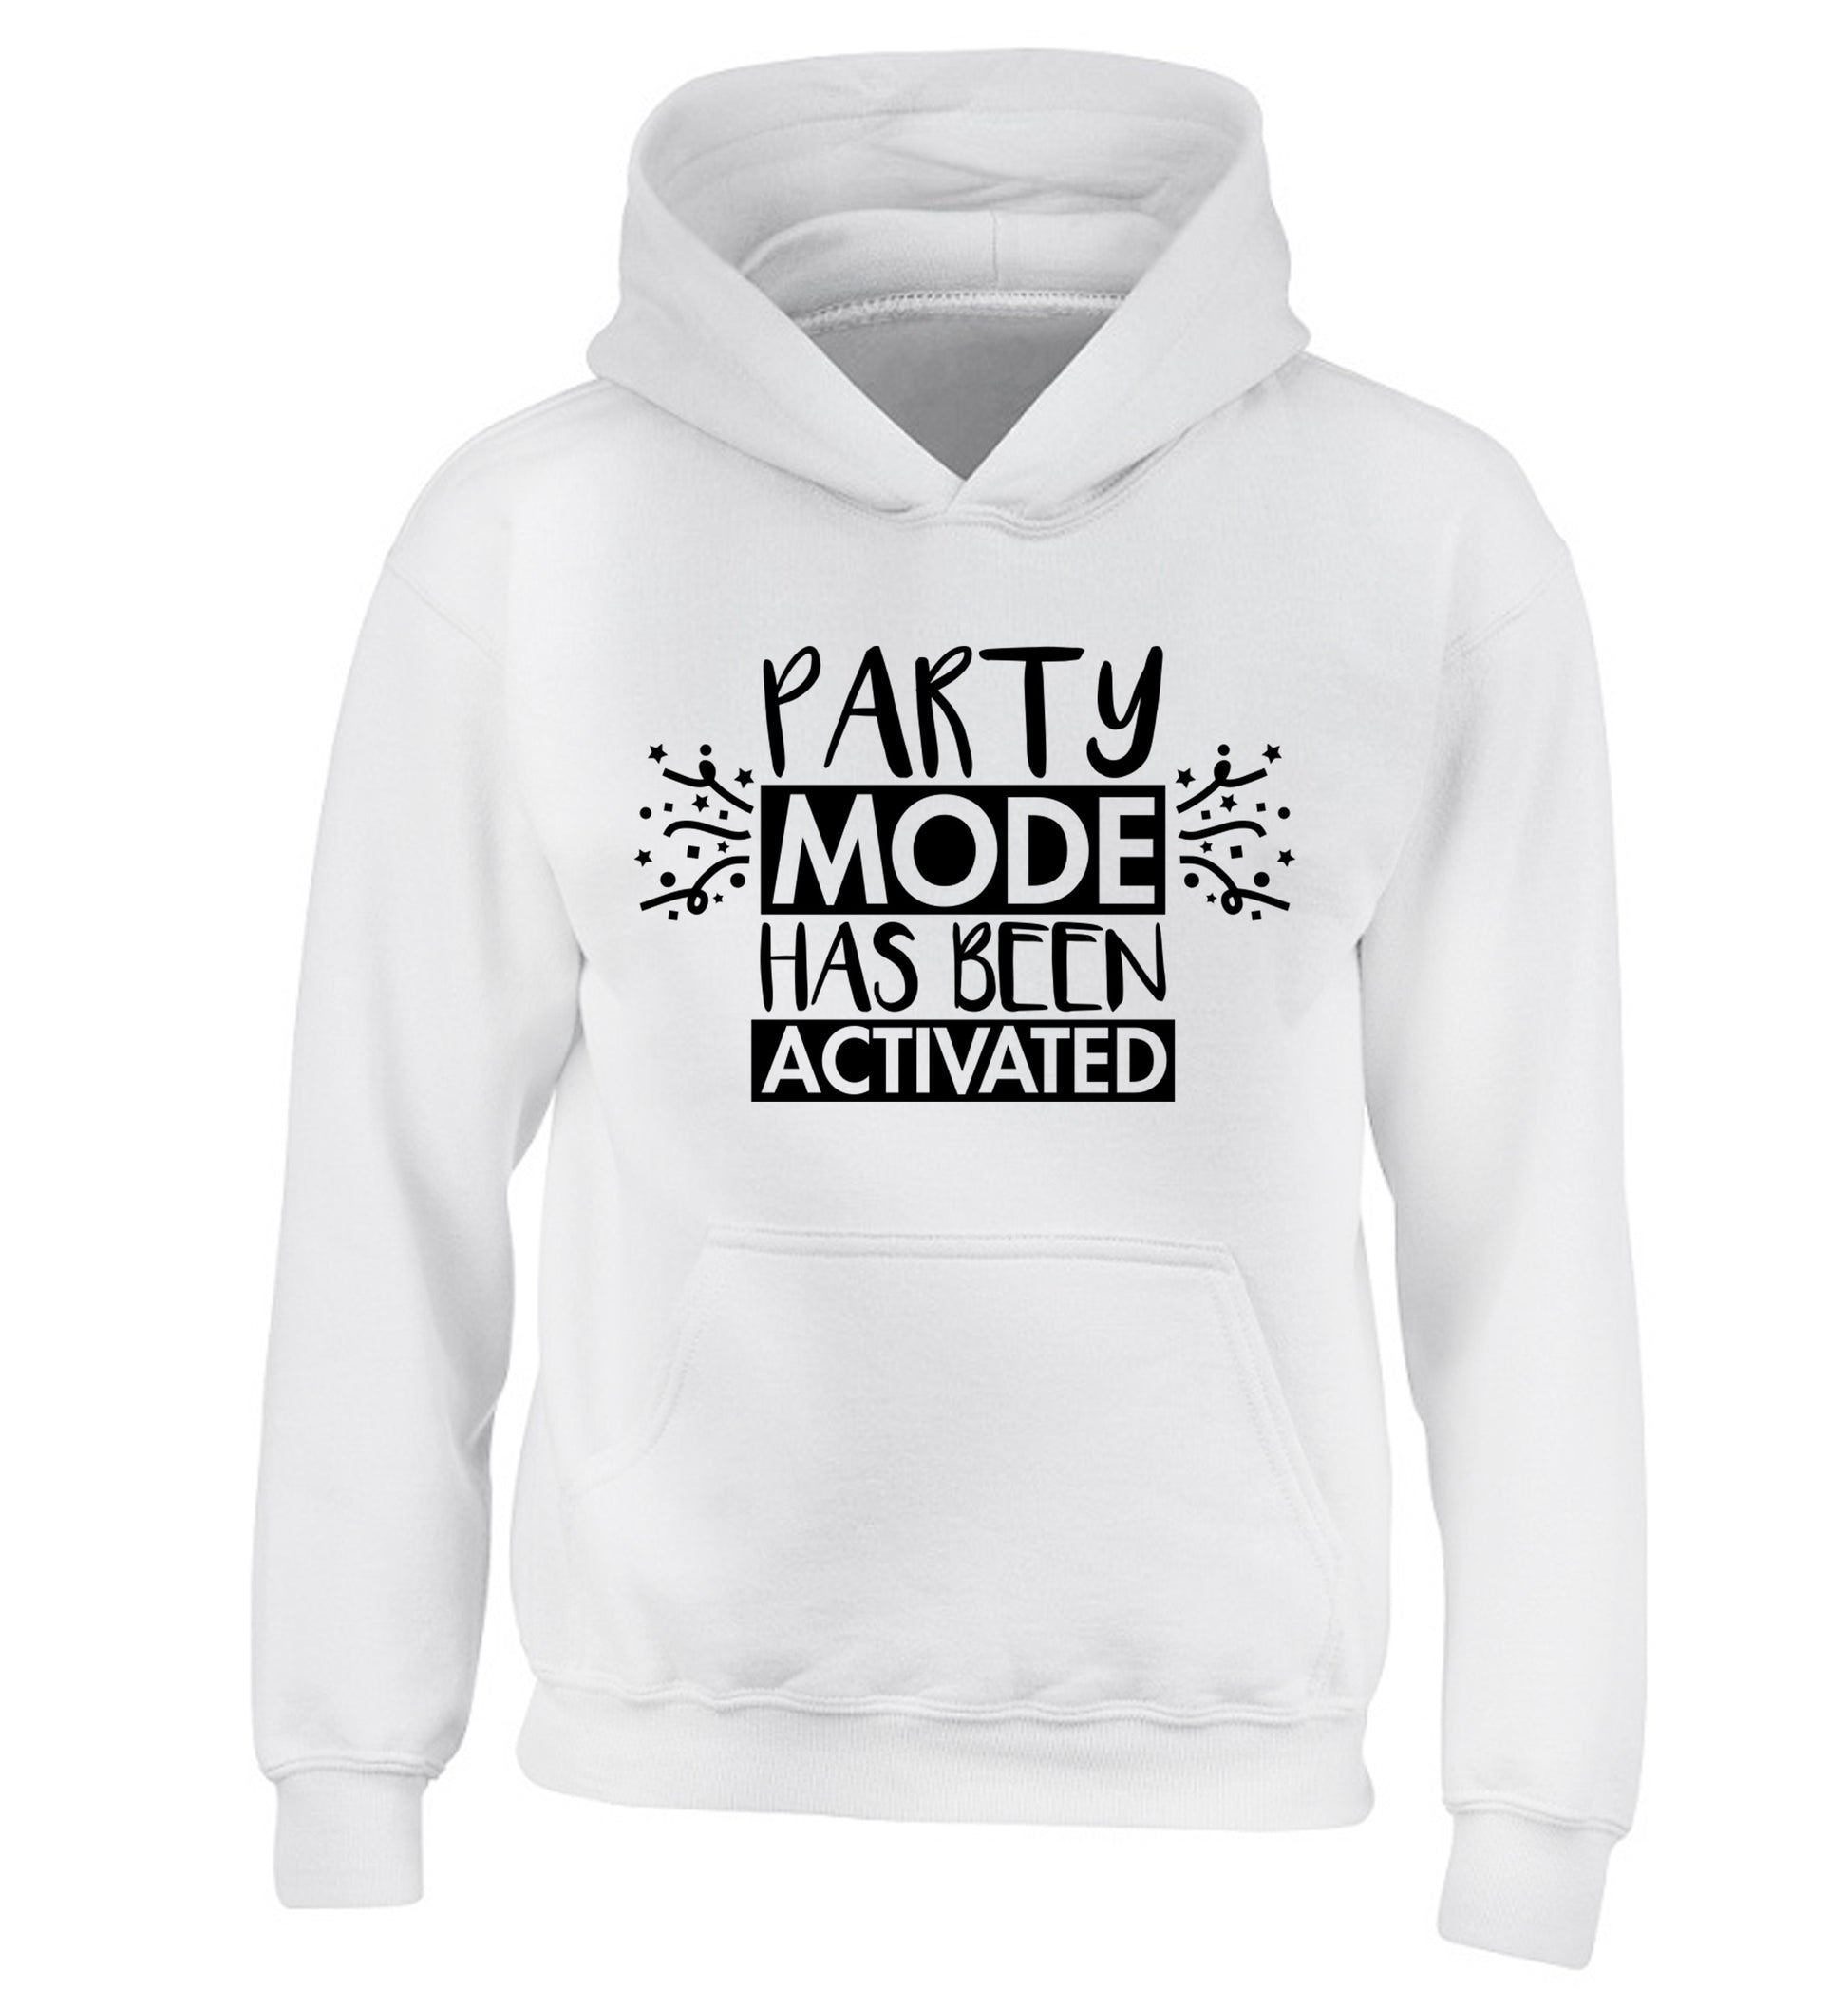 Please do not disturb party mode has been activated children's white hoodie 12-14 Years